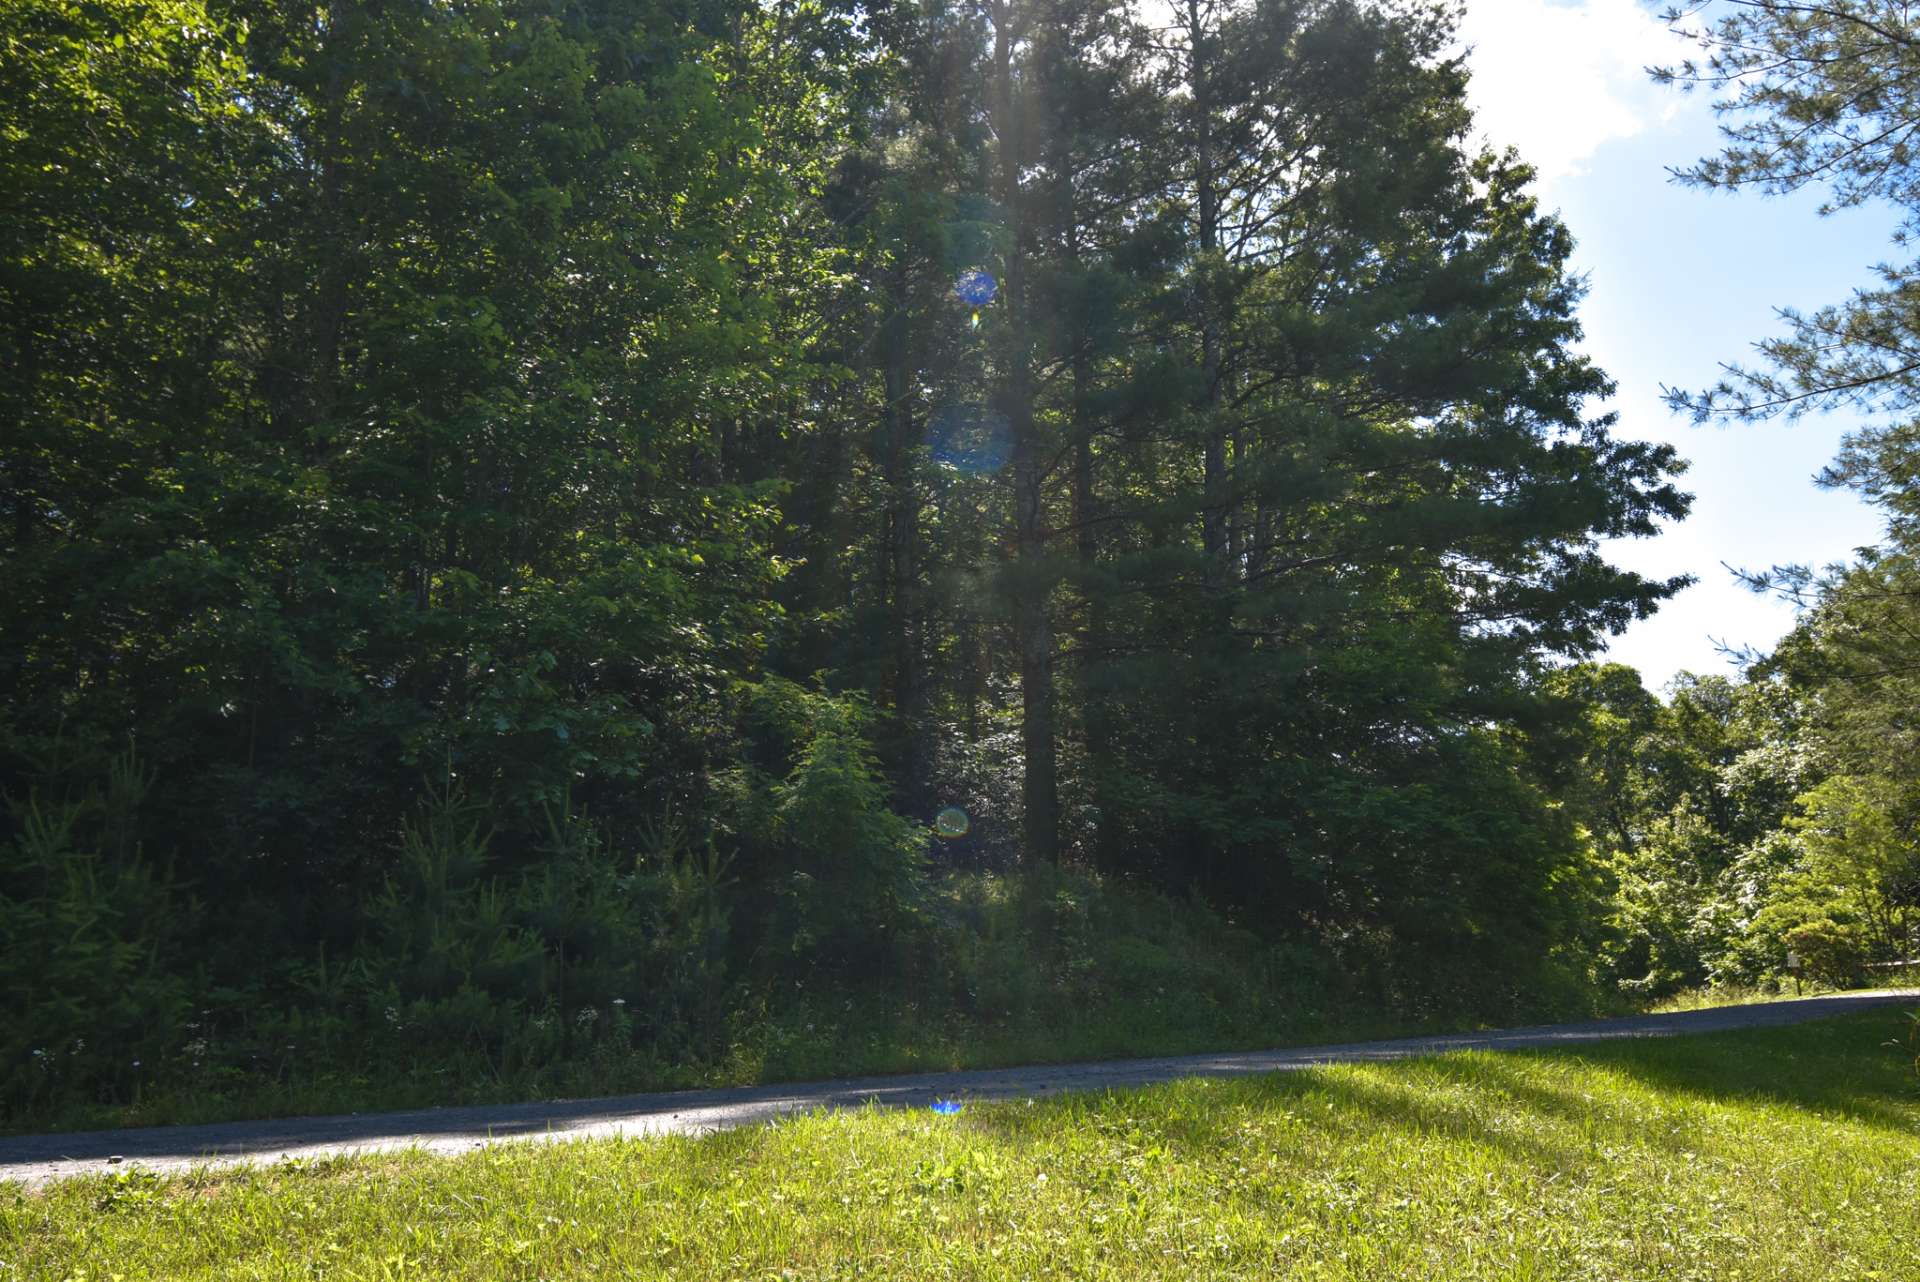 Very affordable Building site convenient to many recreational destinations of the NC High Country.